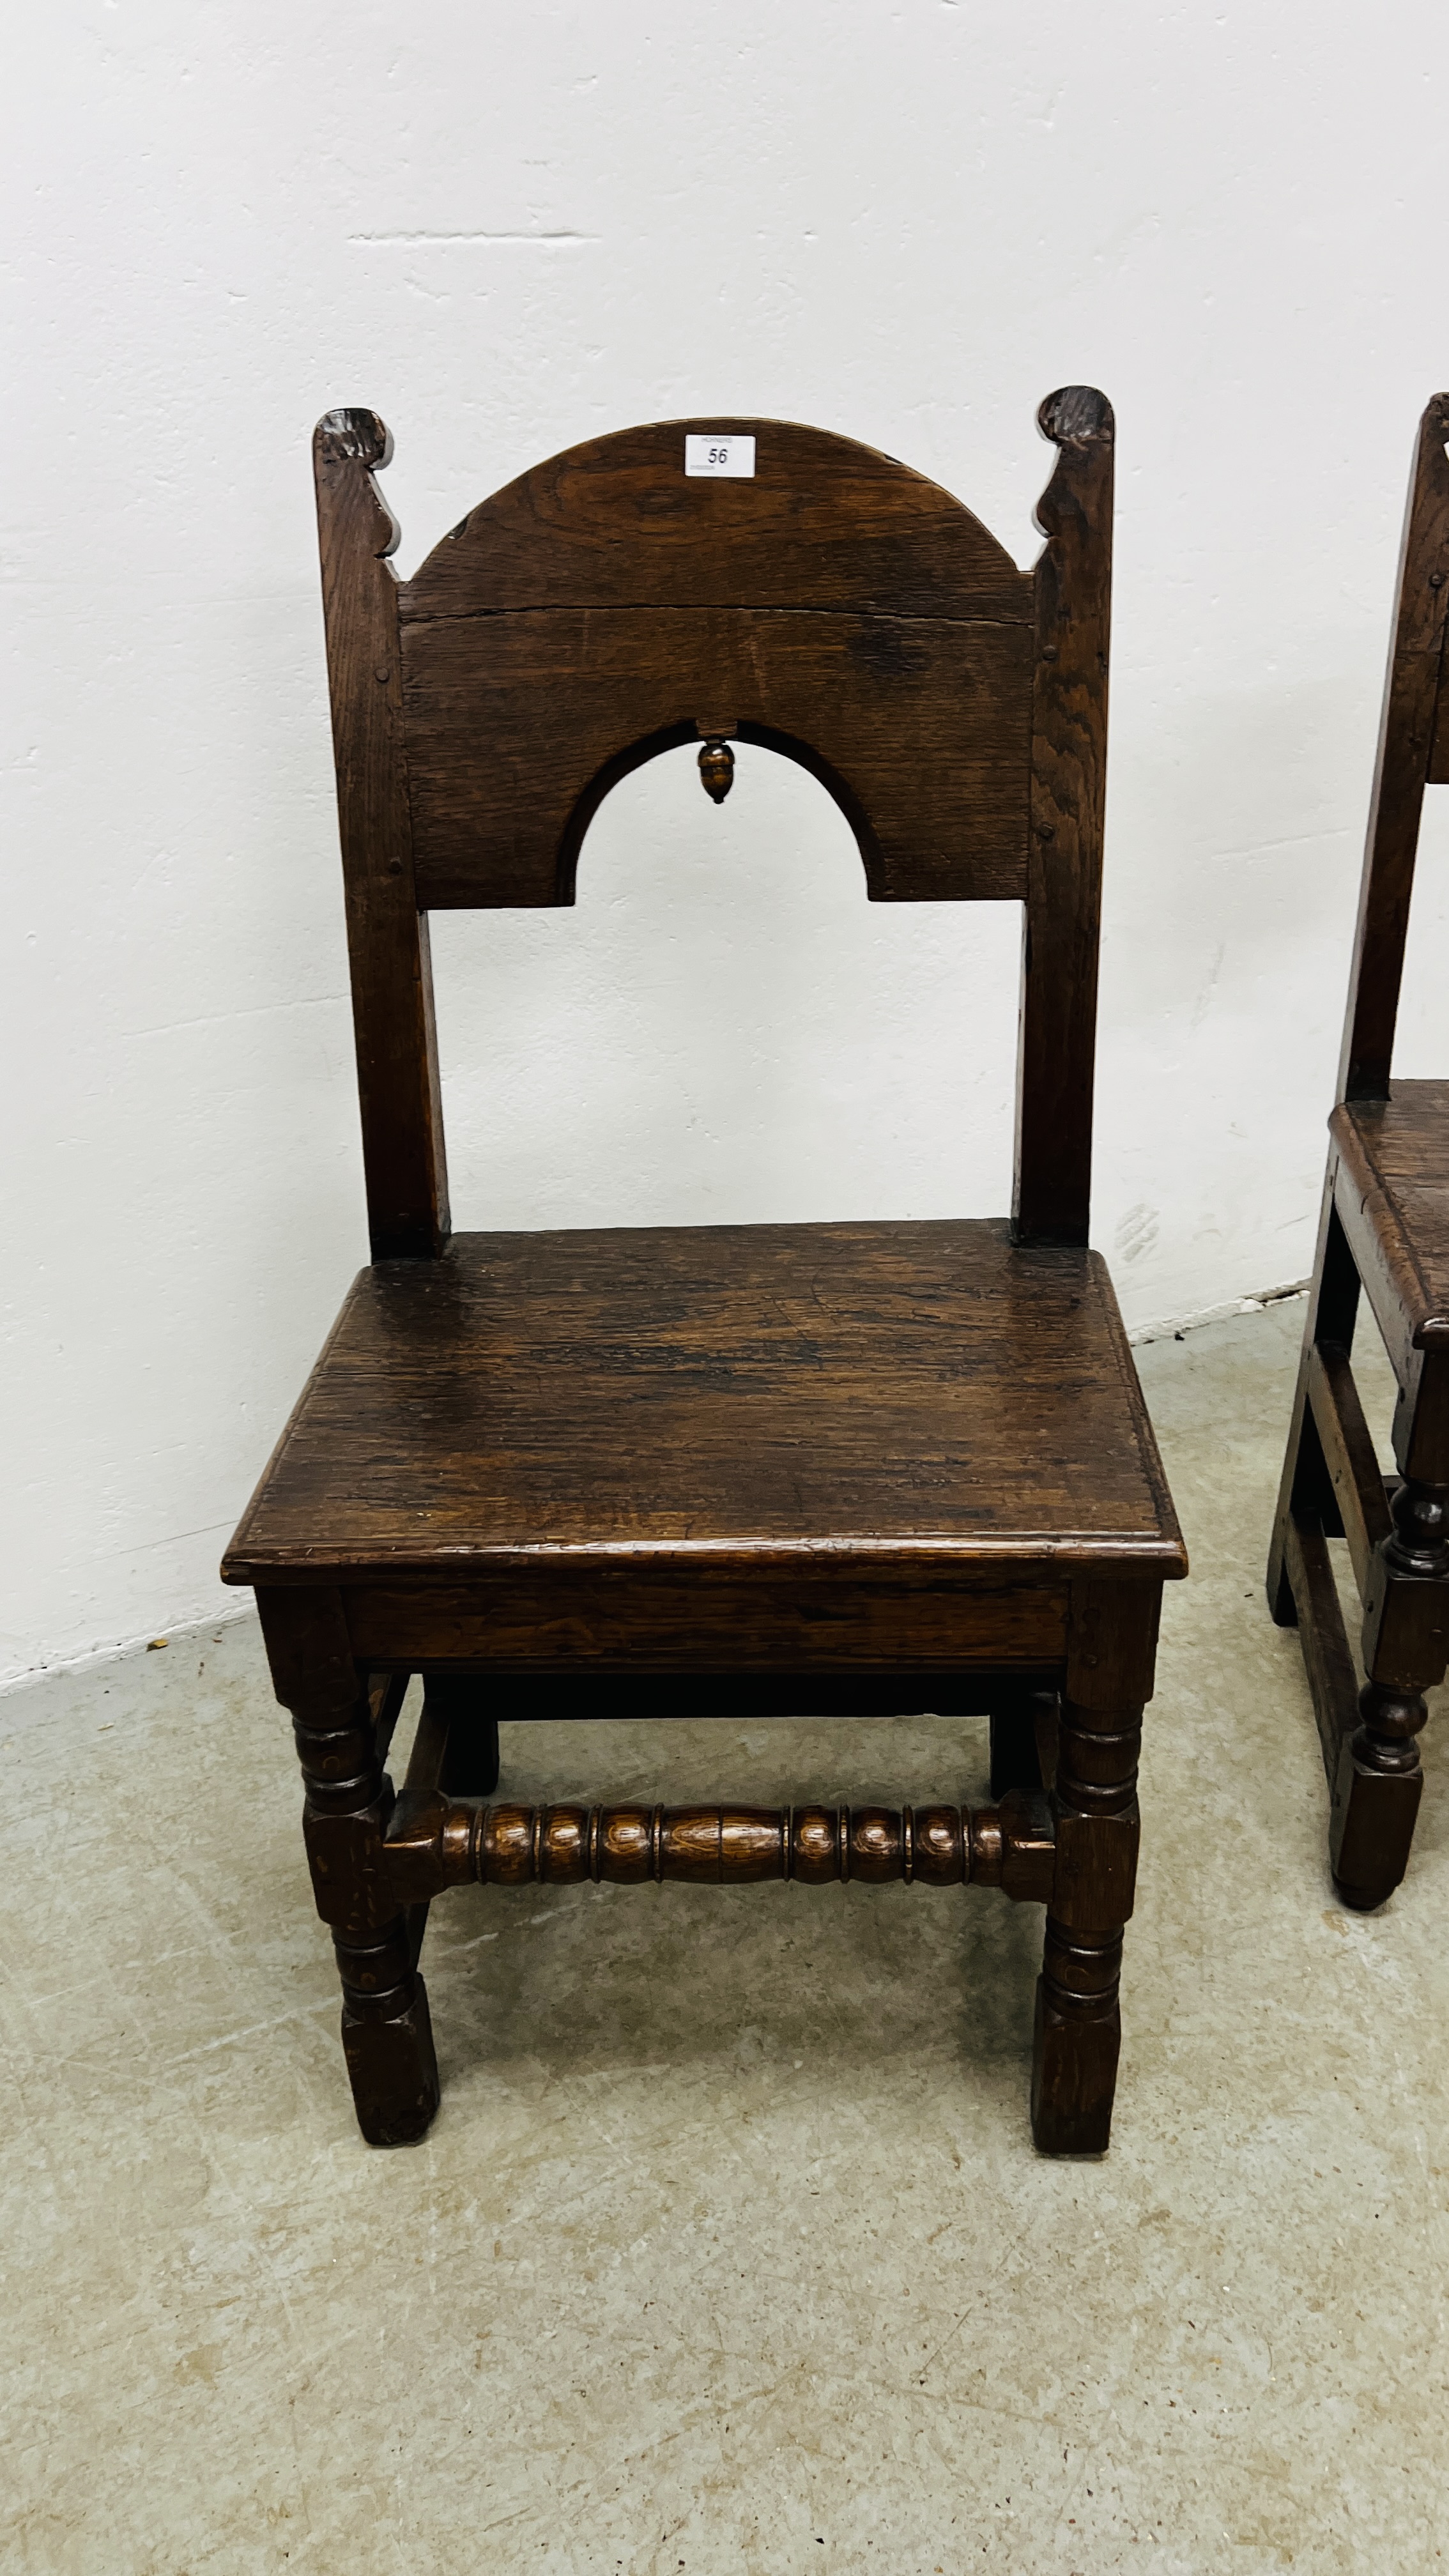 A PAIR OF 17TH CENTURY JOINED OAK CHAIRS, POSSIBLY NORTH COUNTRY. - Image 2 of 20